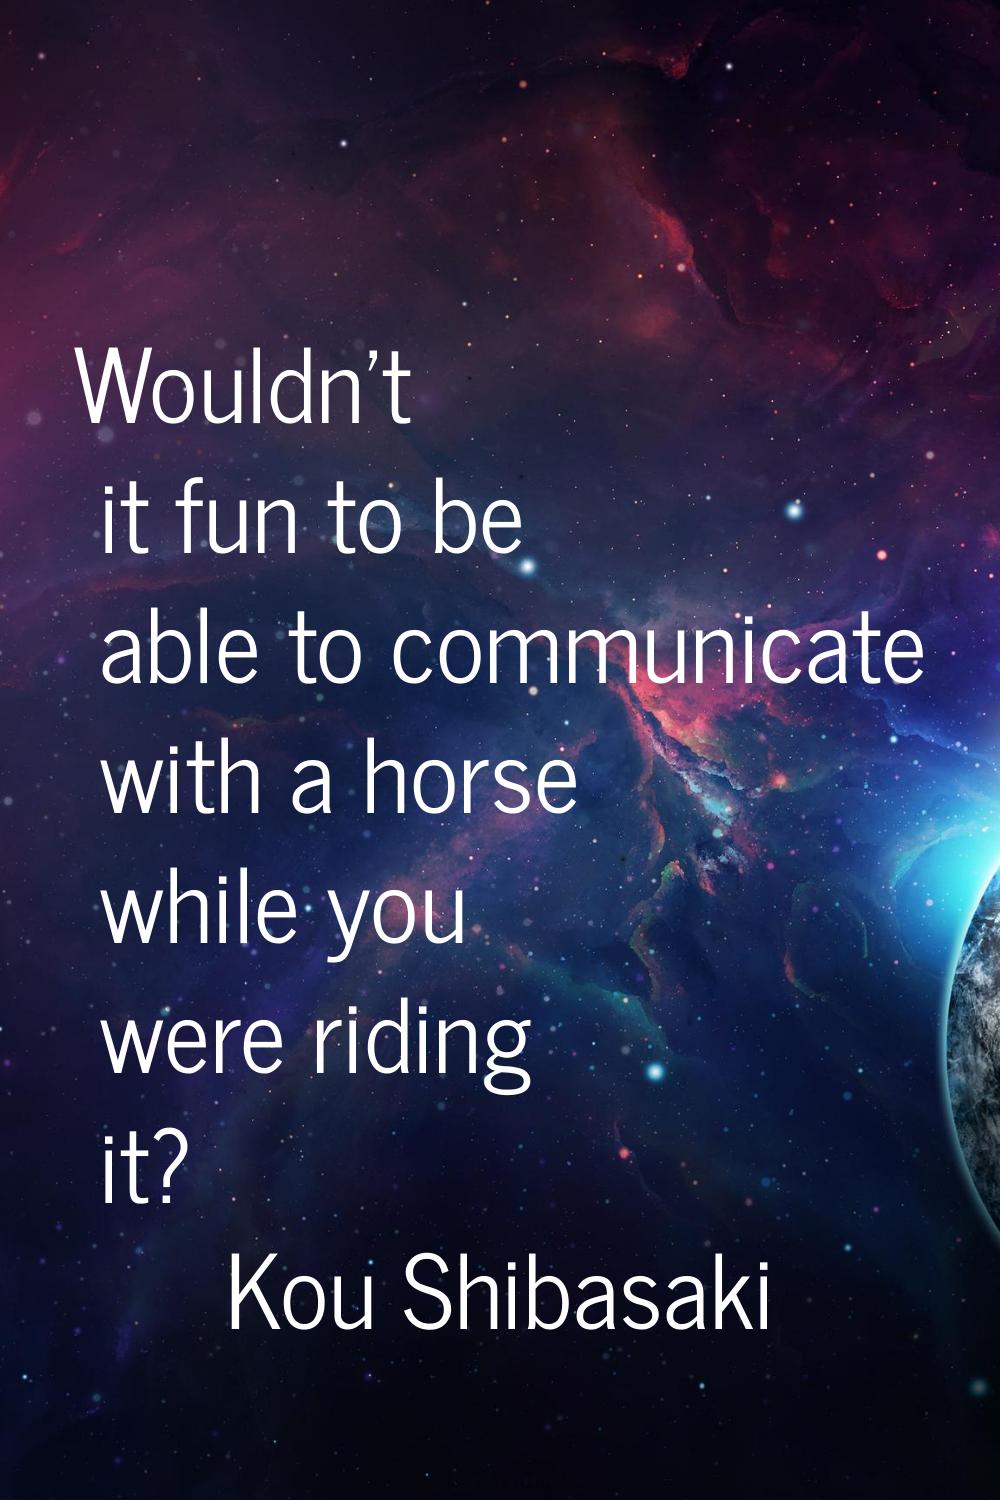 Wouldn't it fun to be able to communicate with a horse while you were riding it?